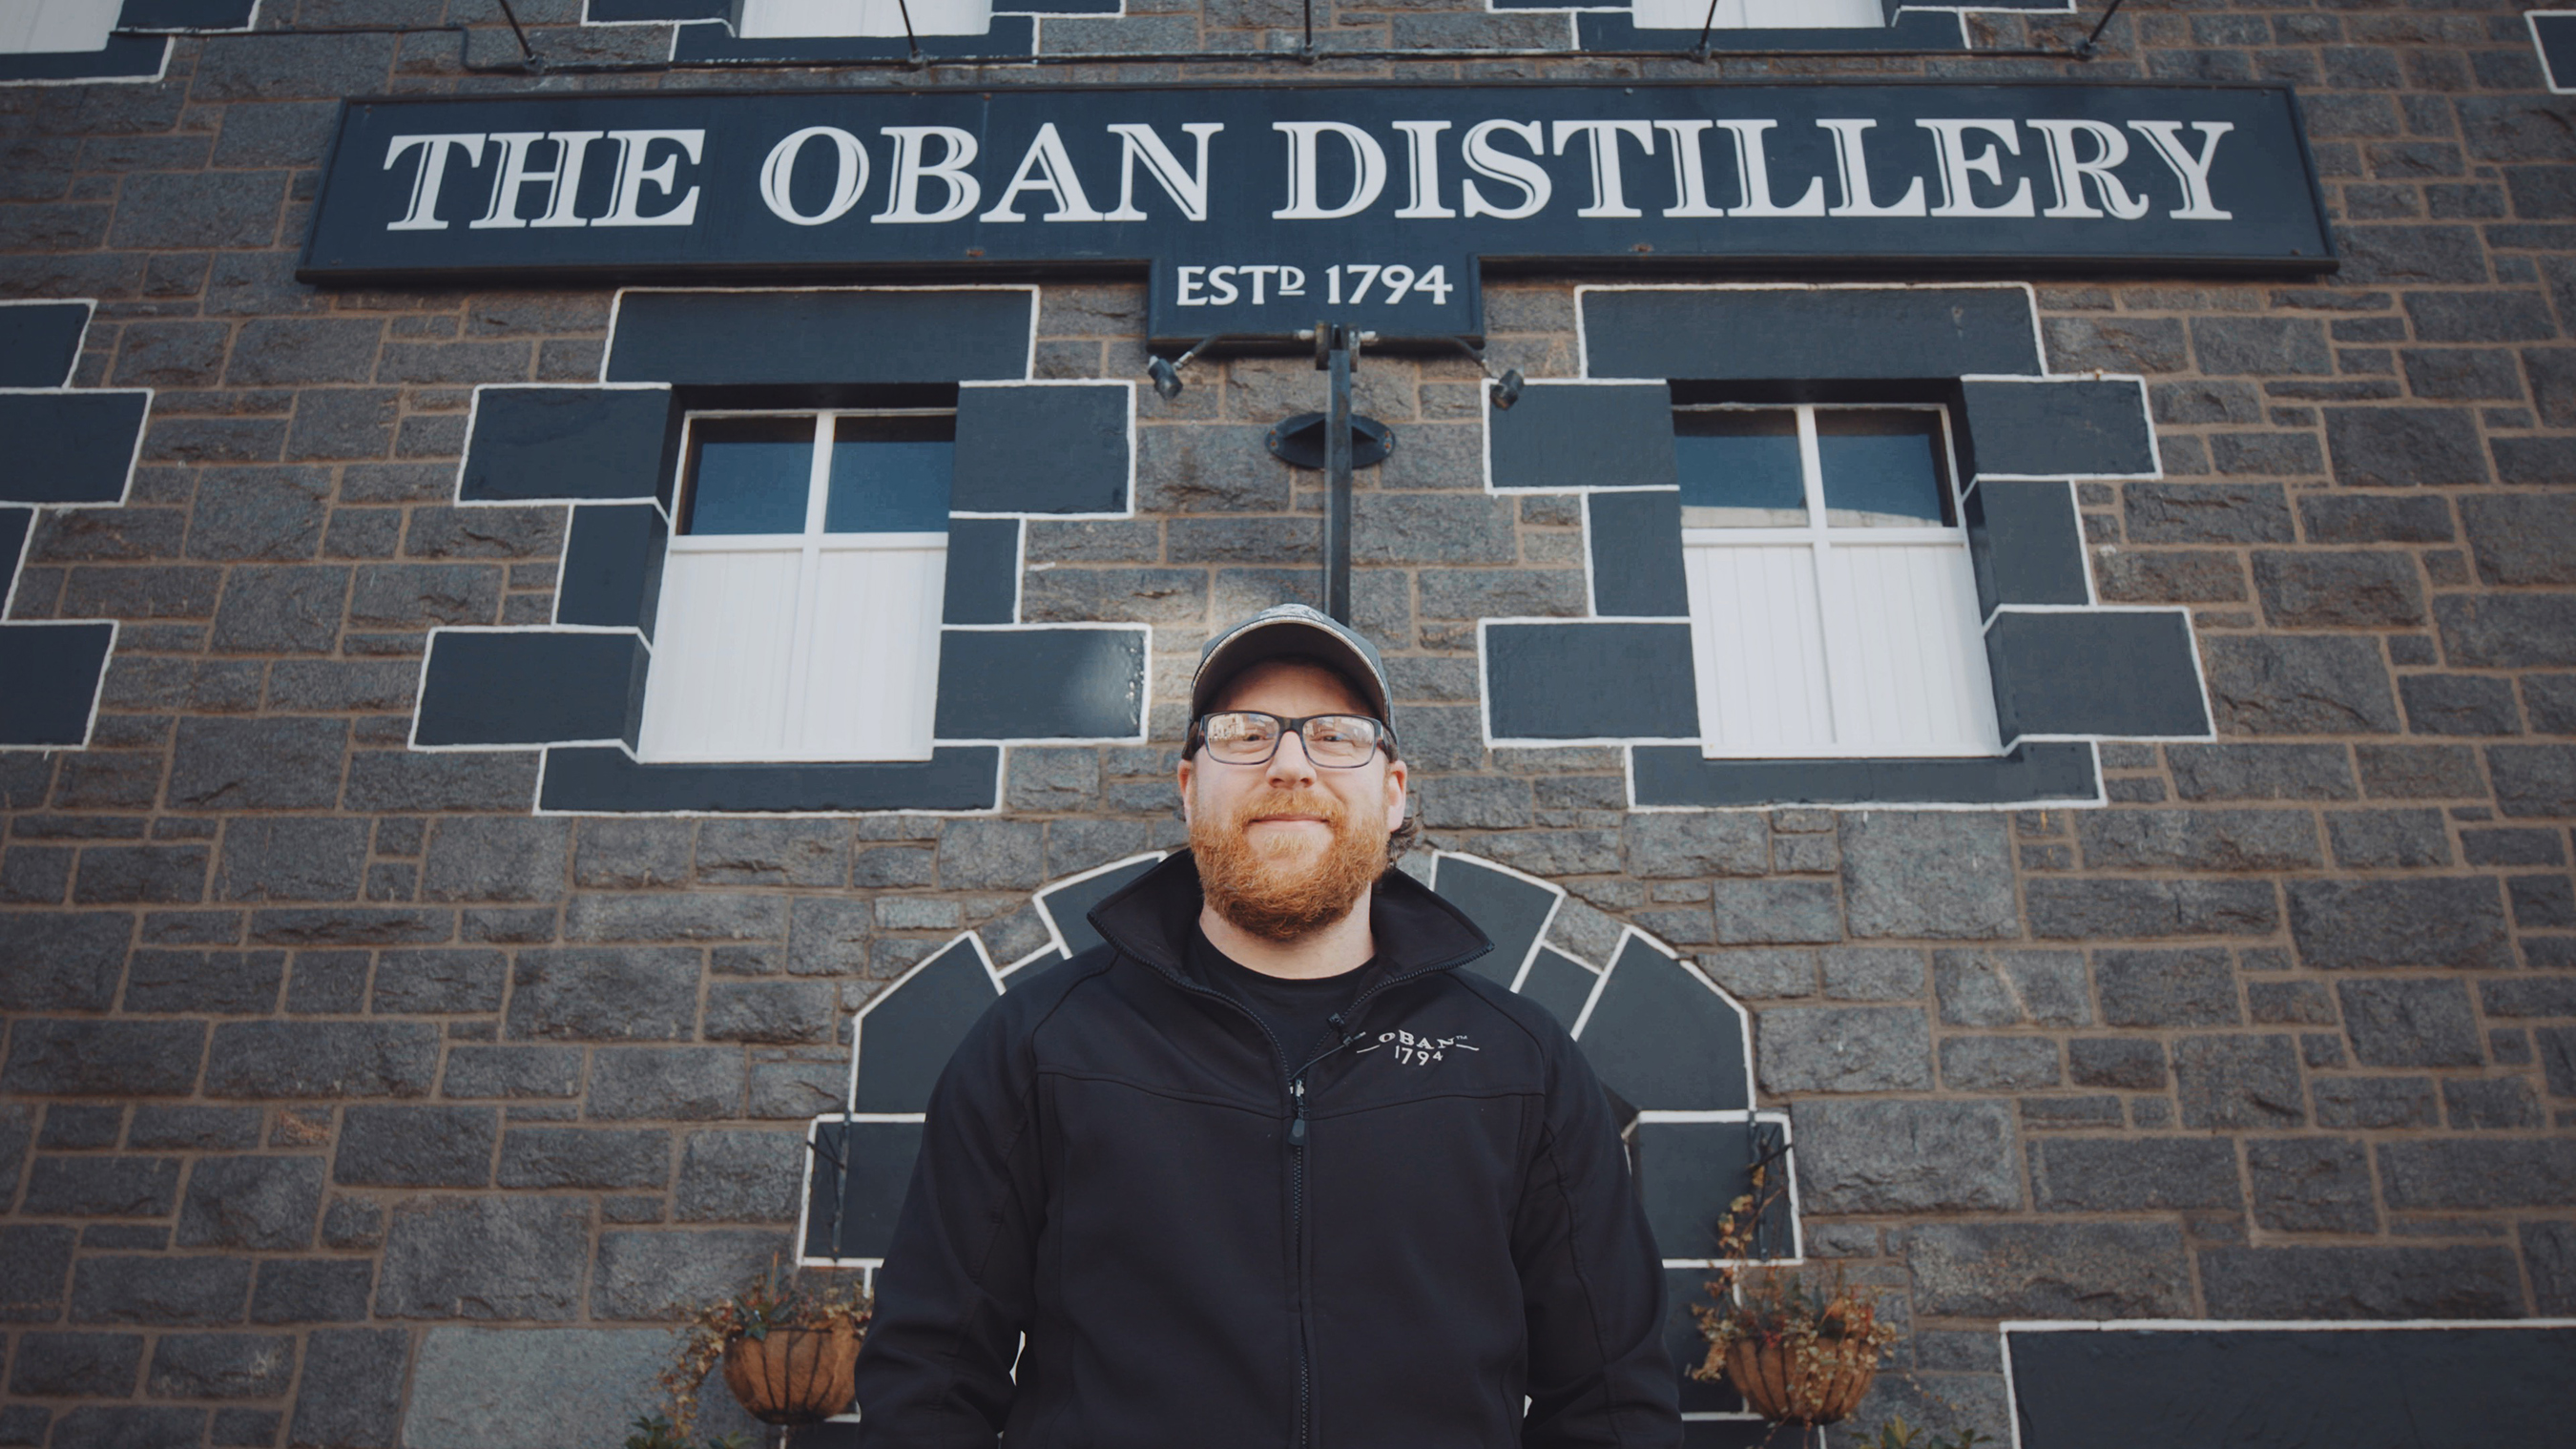 Derek Maclean is a third-generation Oban Distillery worker and has been making this craft Single Malt Scotch Whisky since 2017. His father worked at the Oban distillery for 32 years, and his grandfather for 37 years.